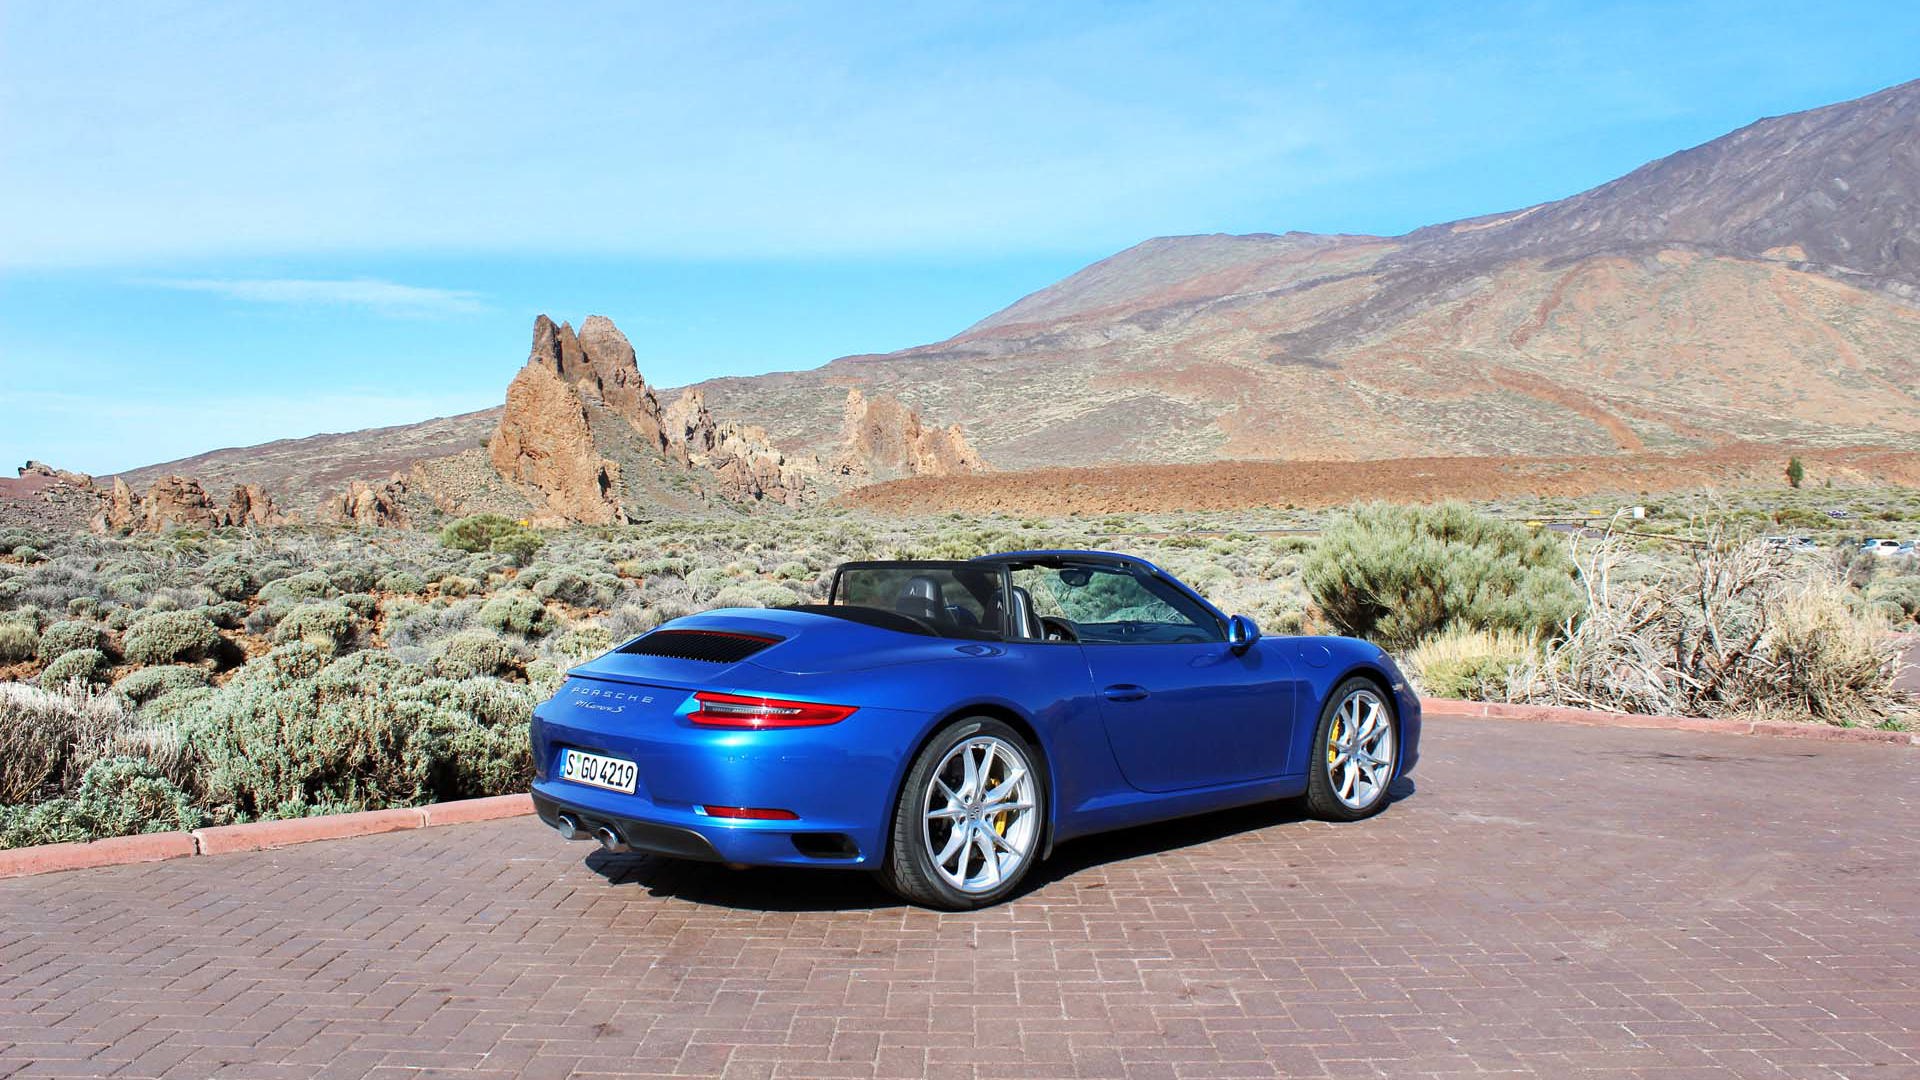 The 2017 Porsche 911 Carrera Cabriolet starts at $116,200. This is a Carrera S Cabriolet – base price $132,200. That volcano last erupted in 1798. If it happens again, the 911’s roof goes up in less than 20 seconds.